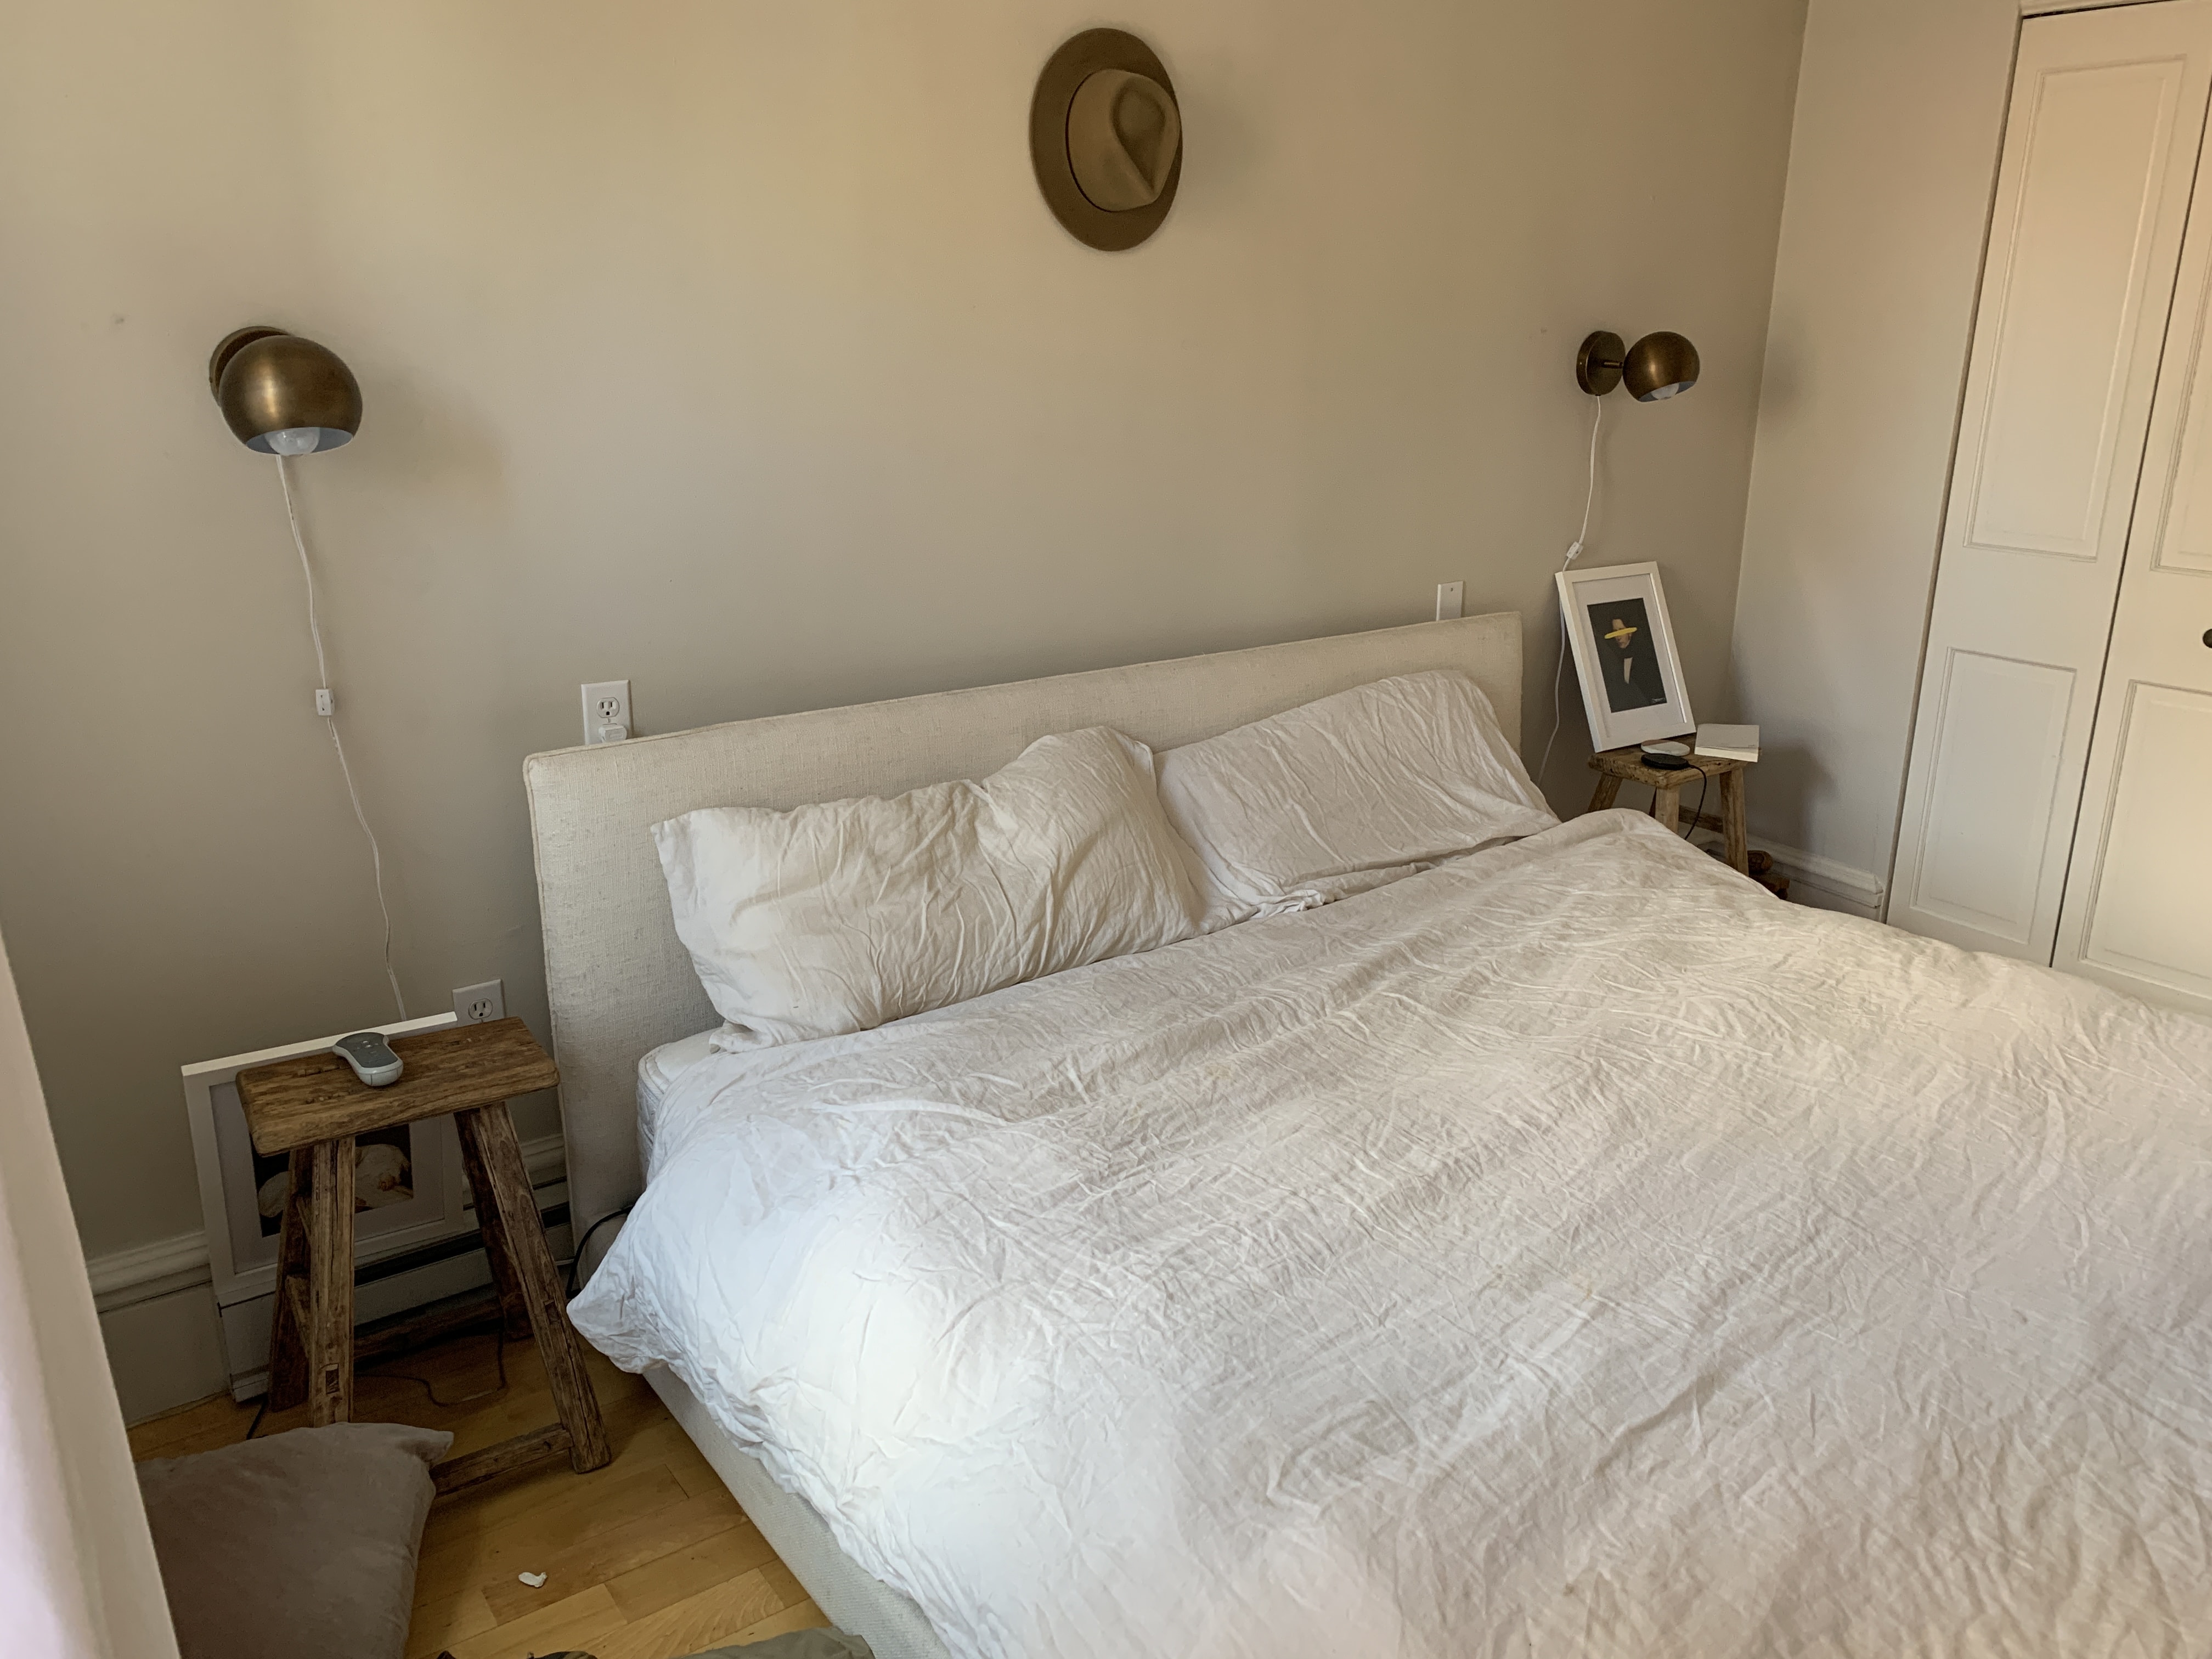 Our Bedroom Makeover With Article Broma Bakery